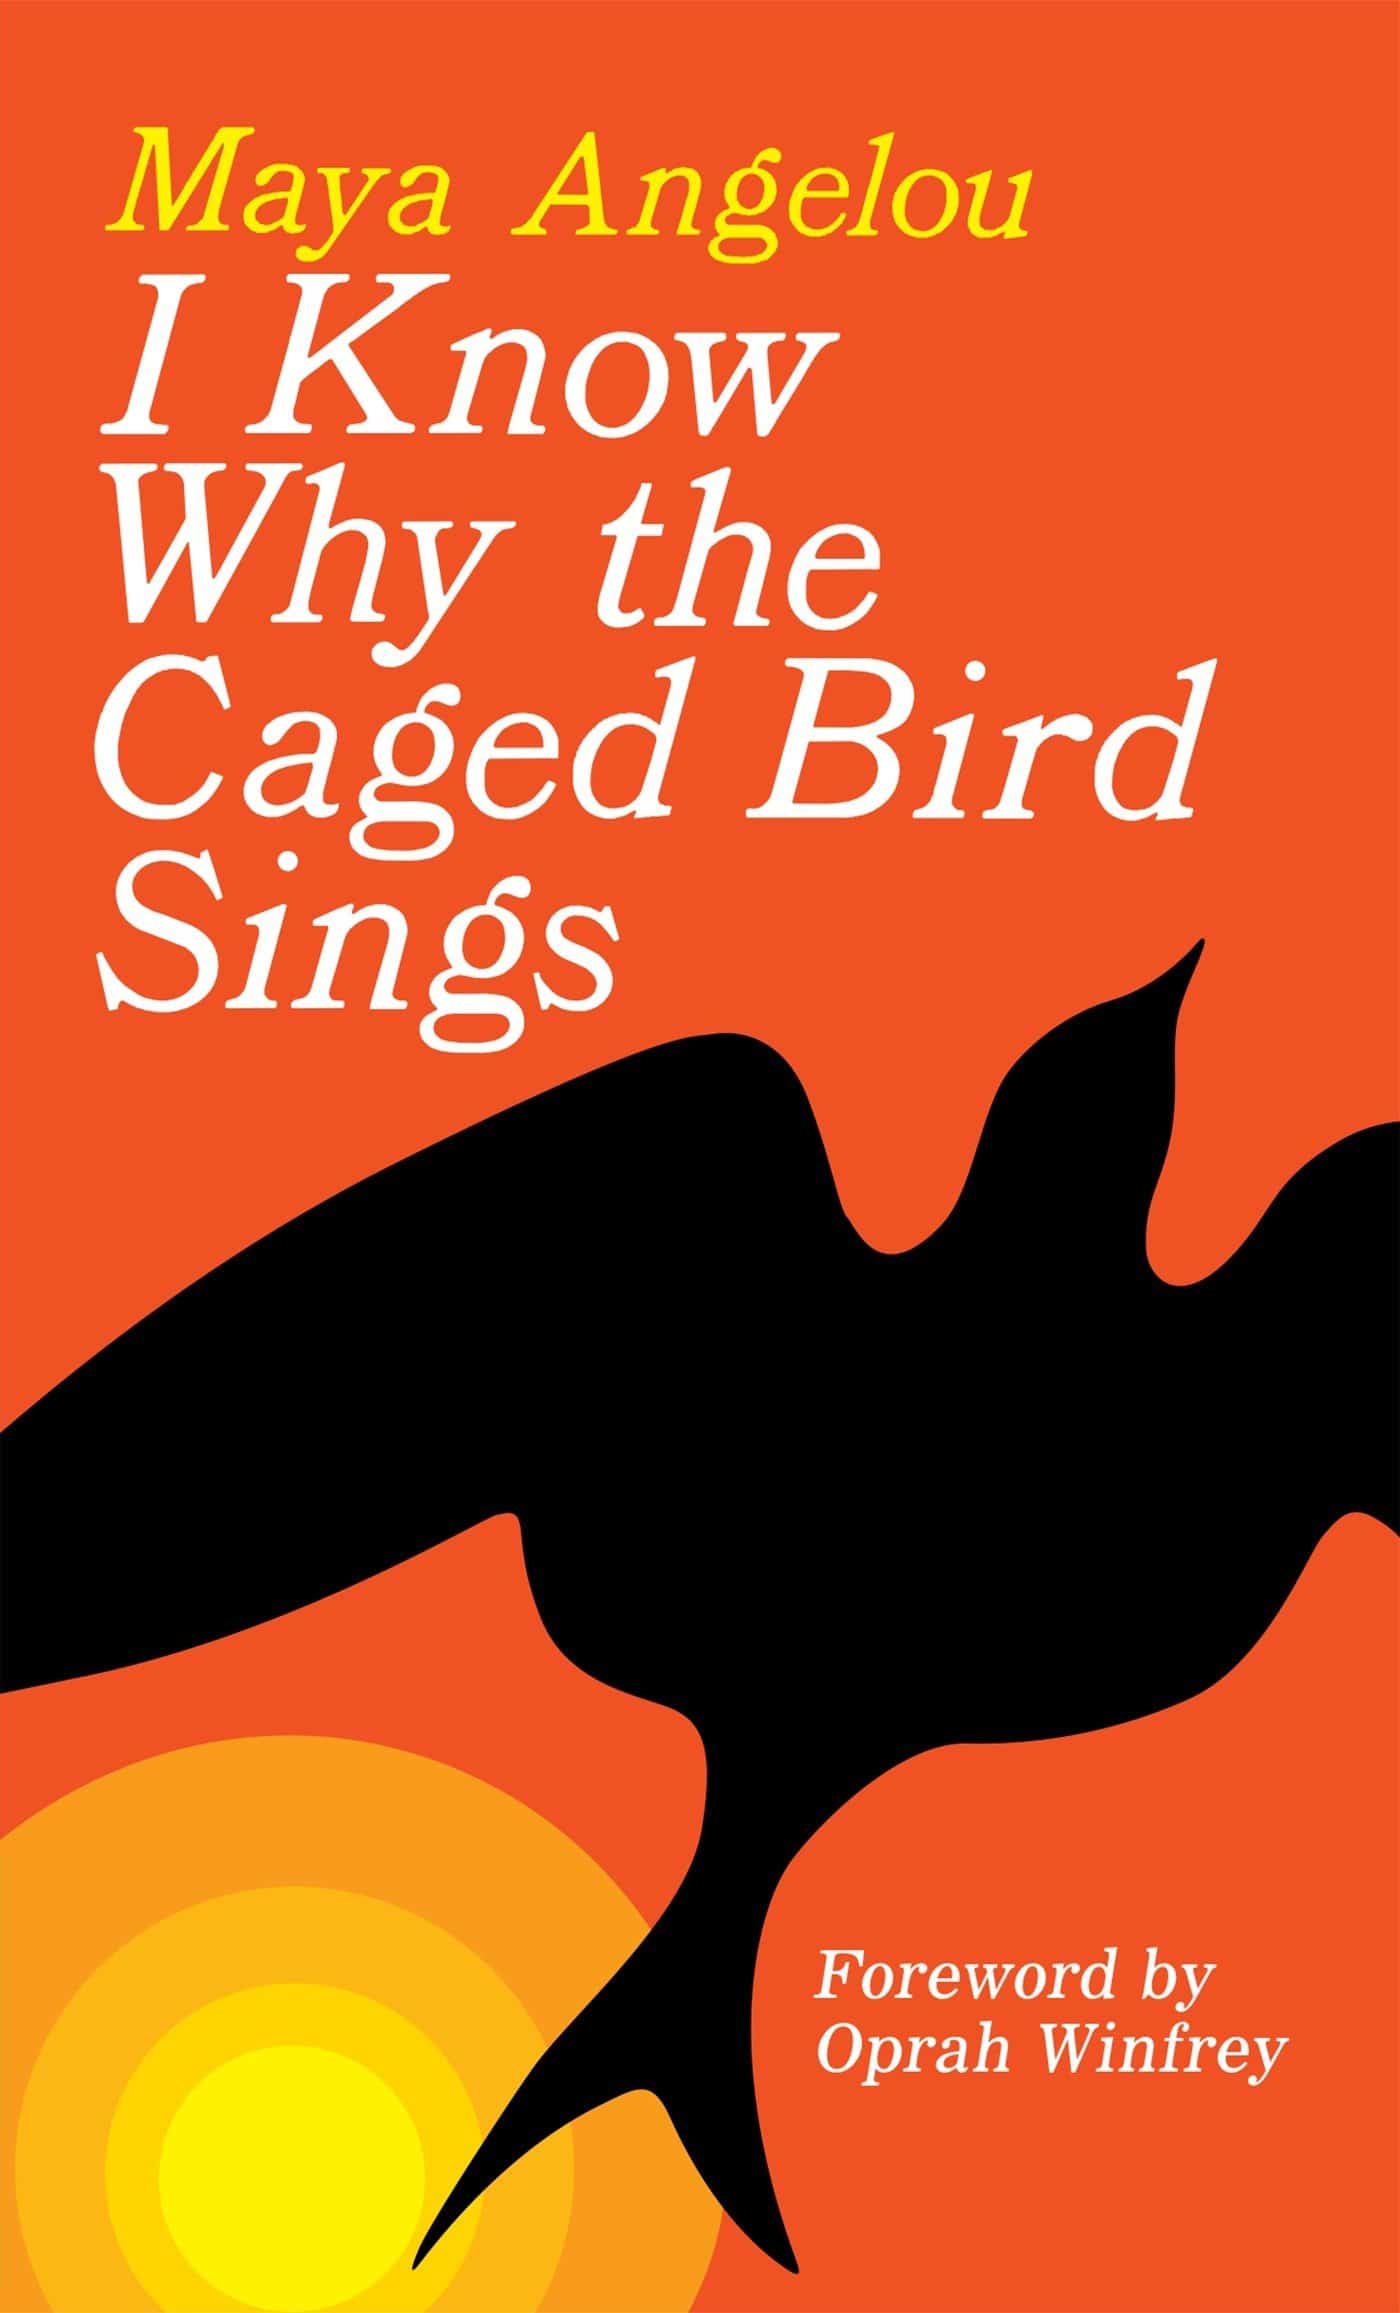 I Know Why the Caged Bird Sings by Maya Angelou book cover